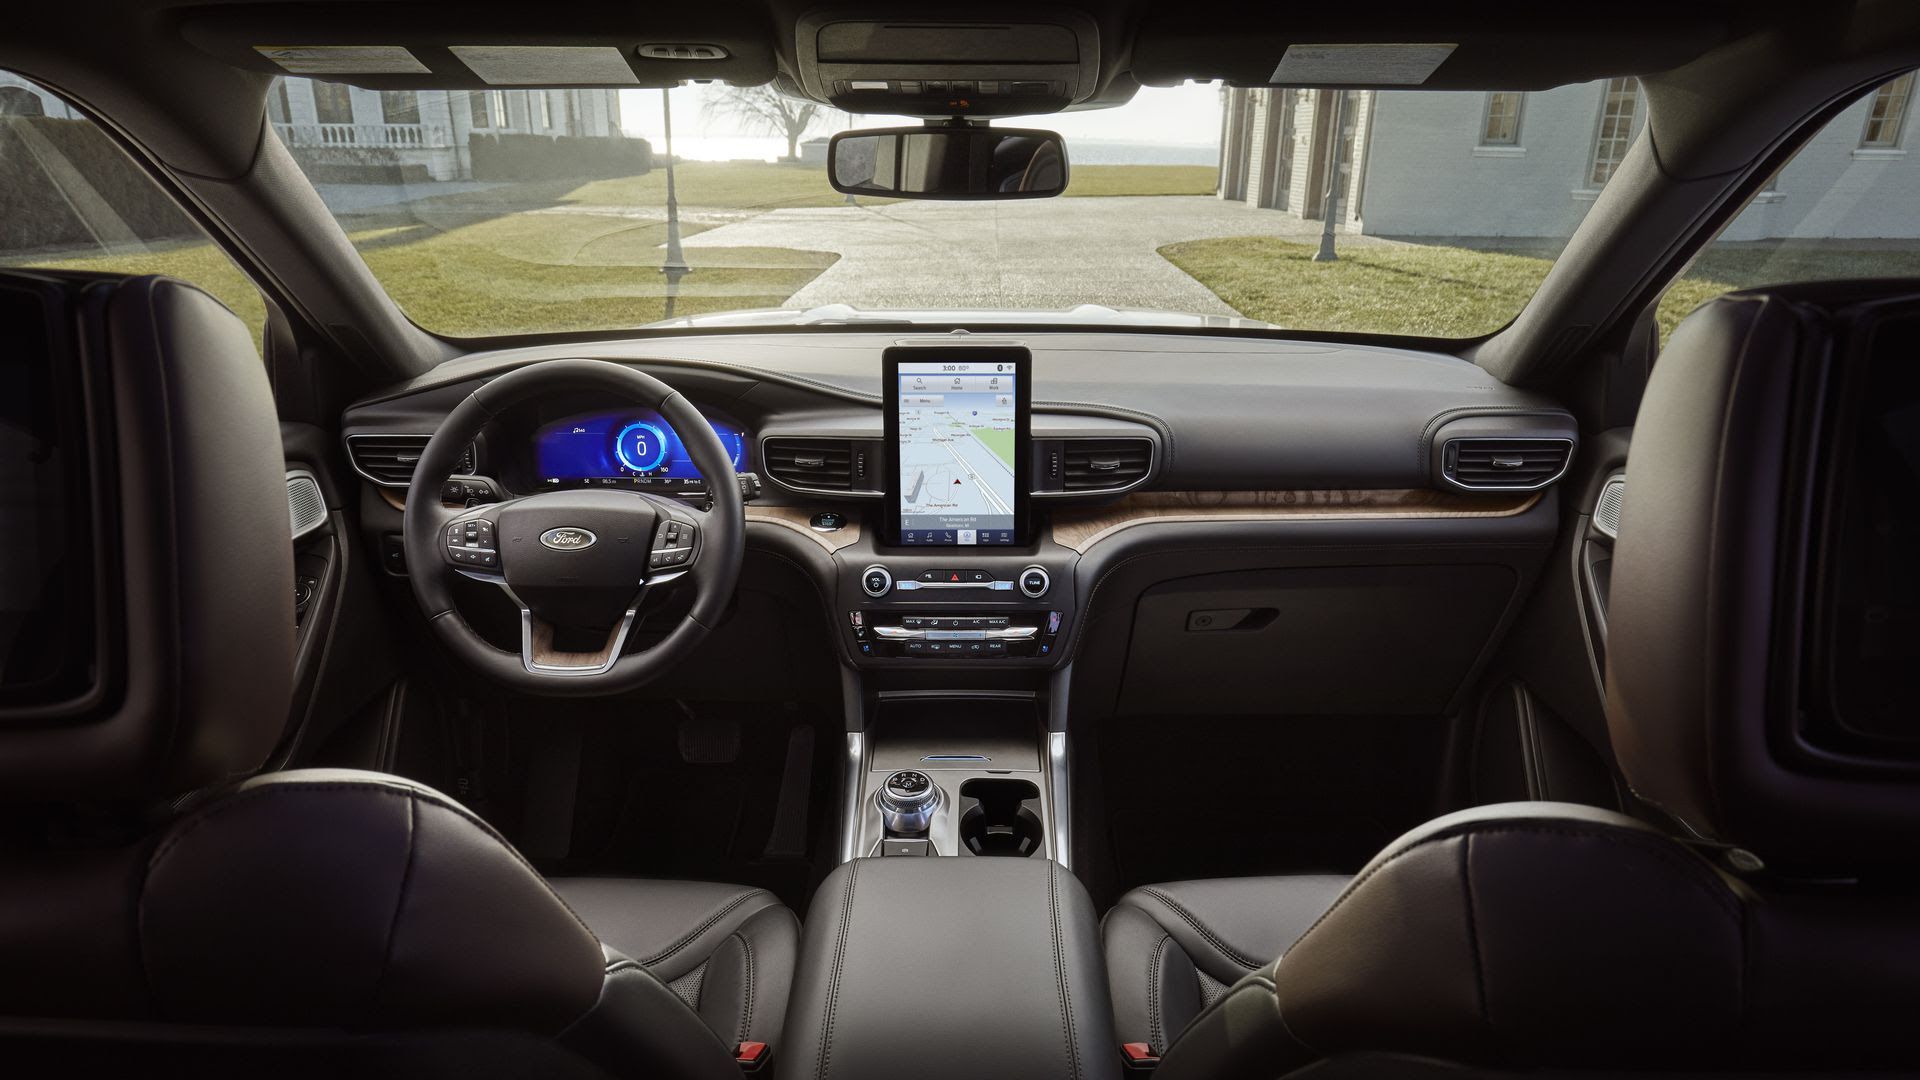 A photo of the inside of the 2020 Ford Explorer, which has a touch screen pad.